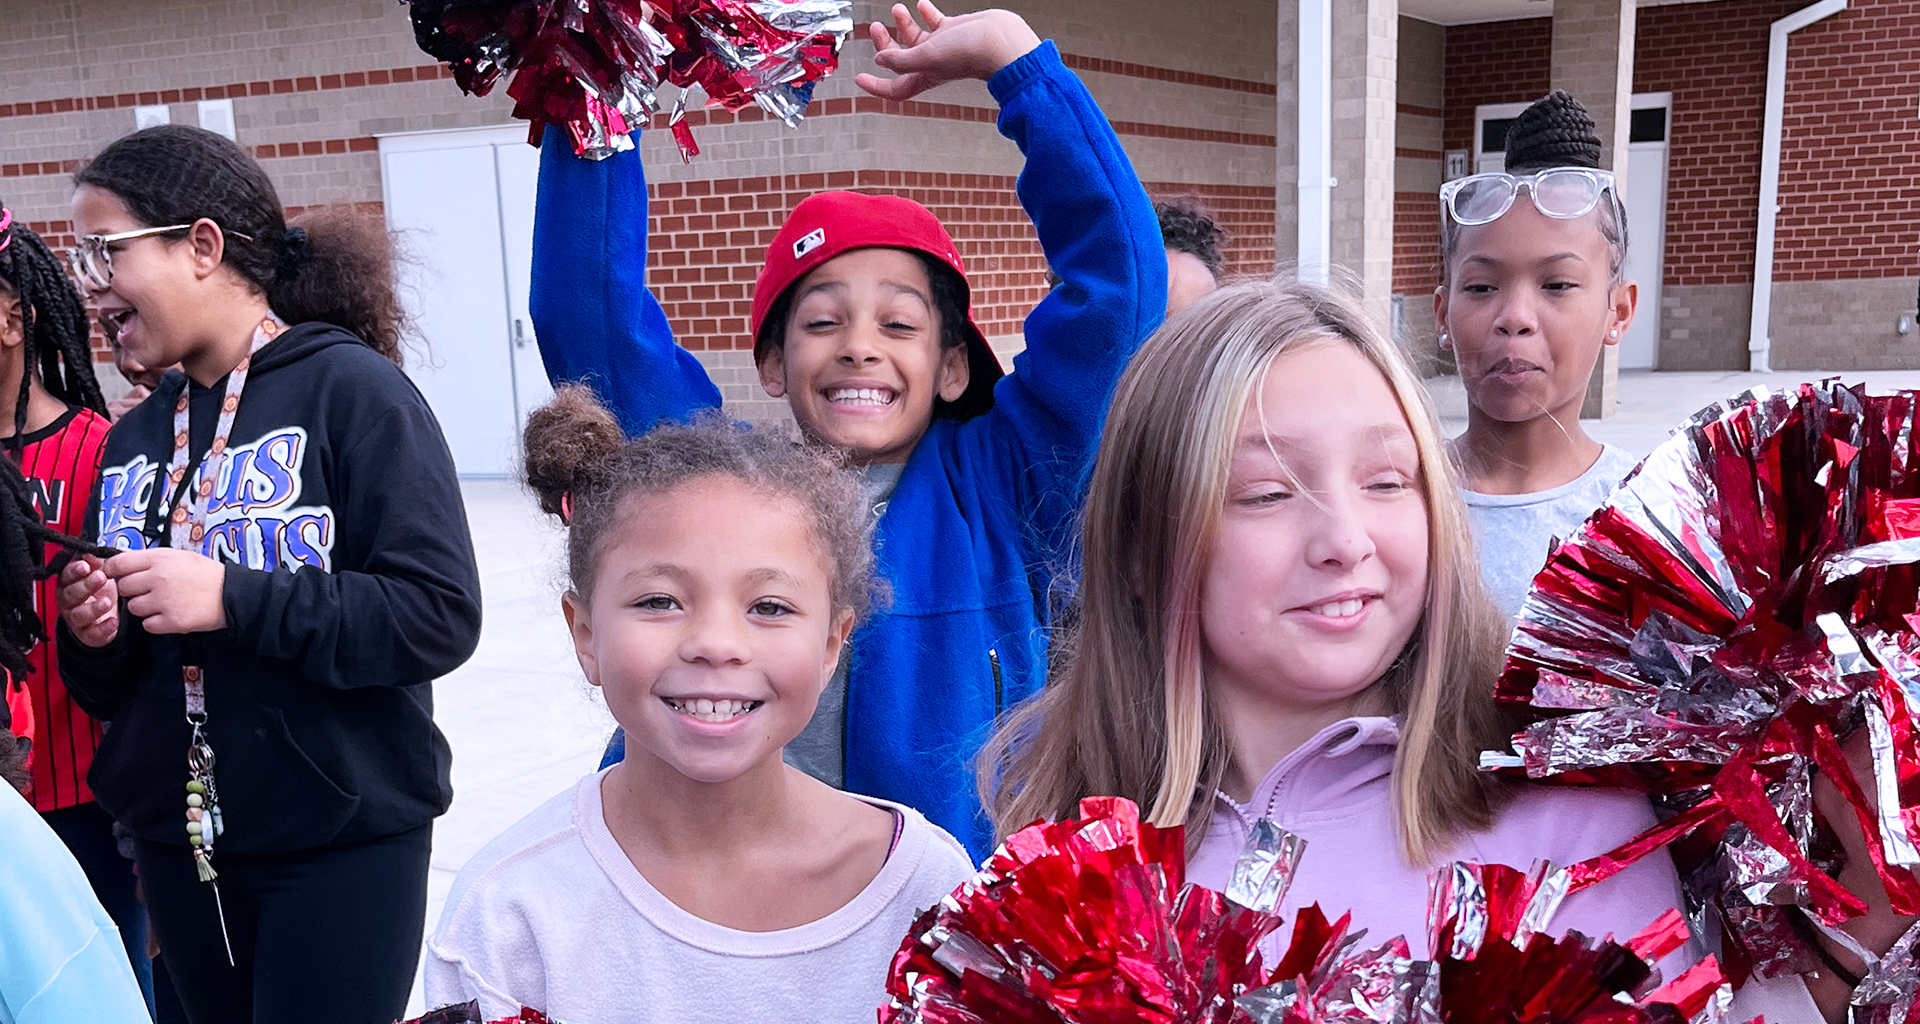 Students with pompoms outside smiling for the camera.